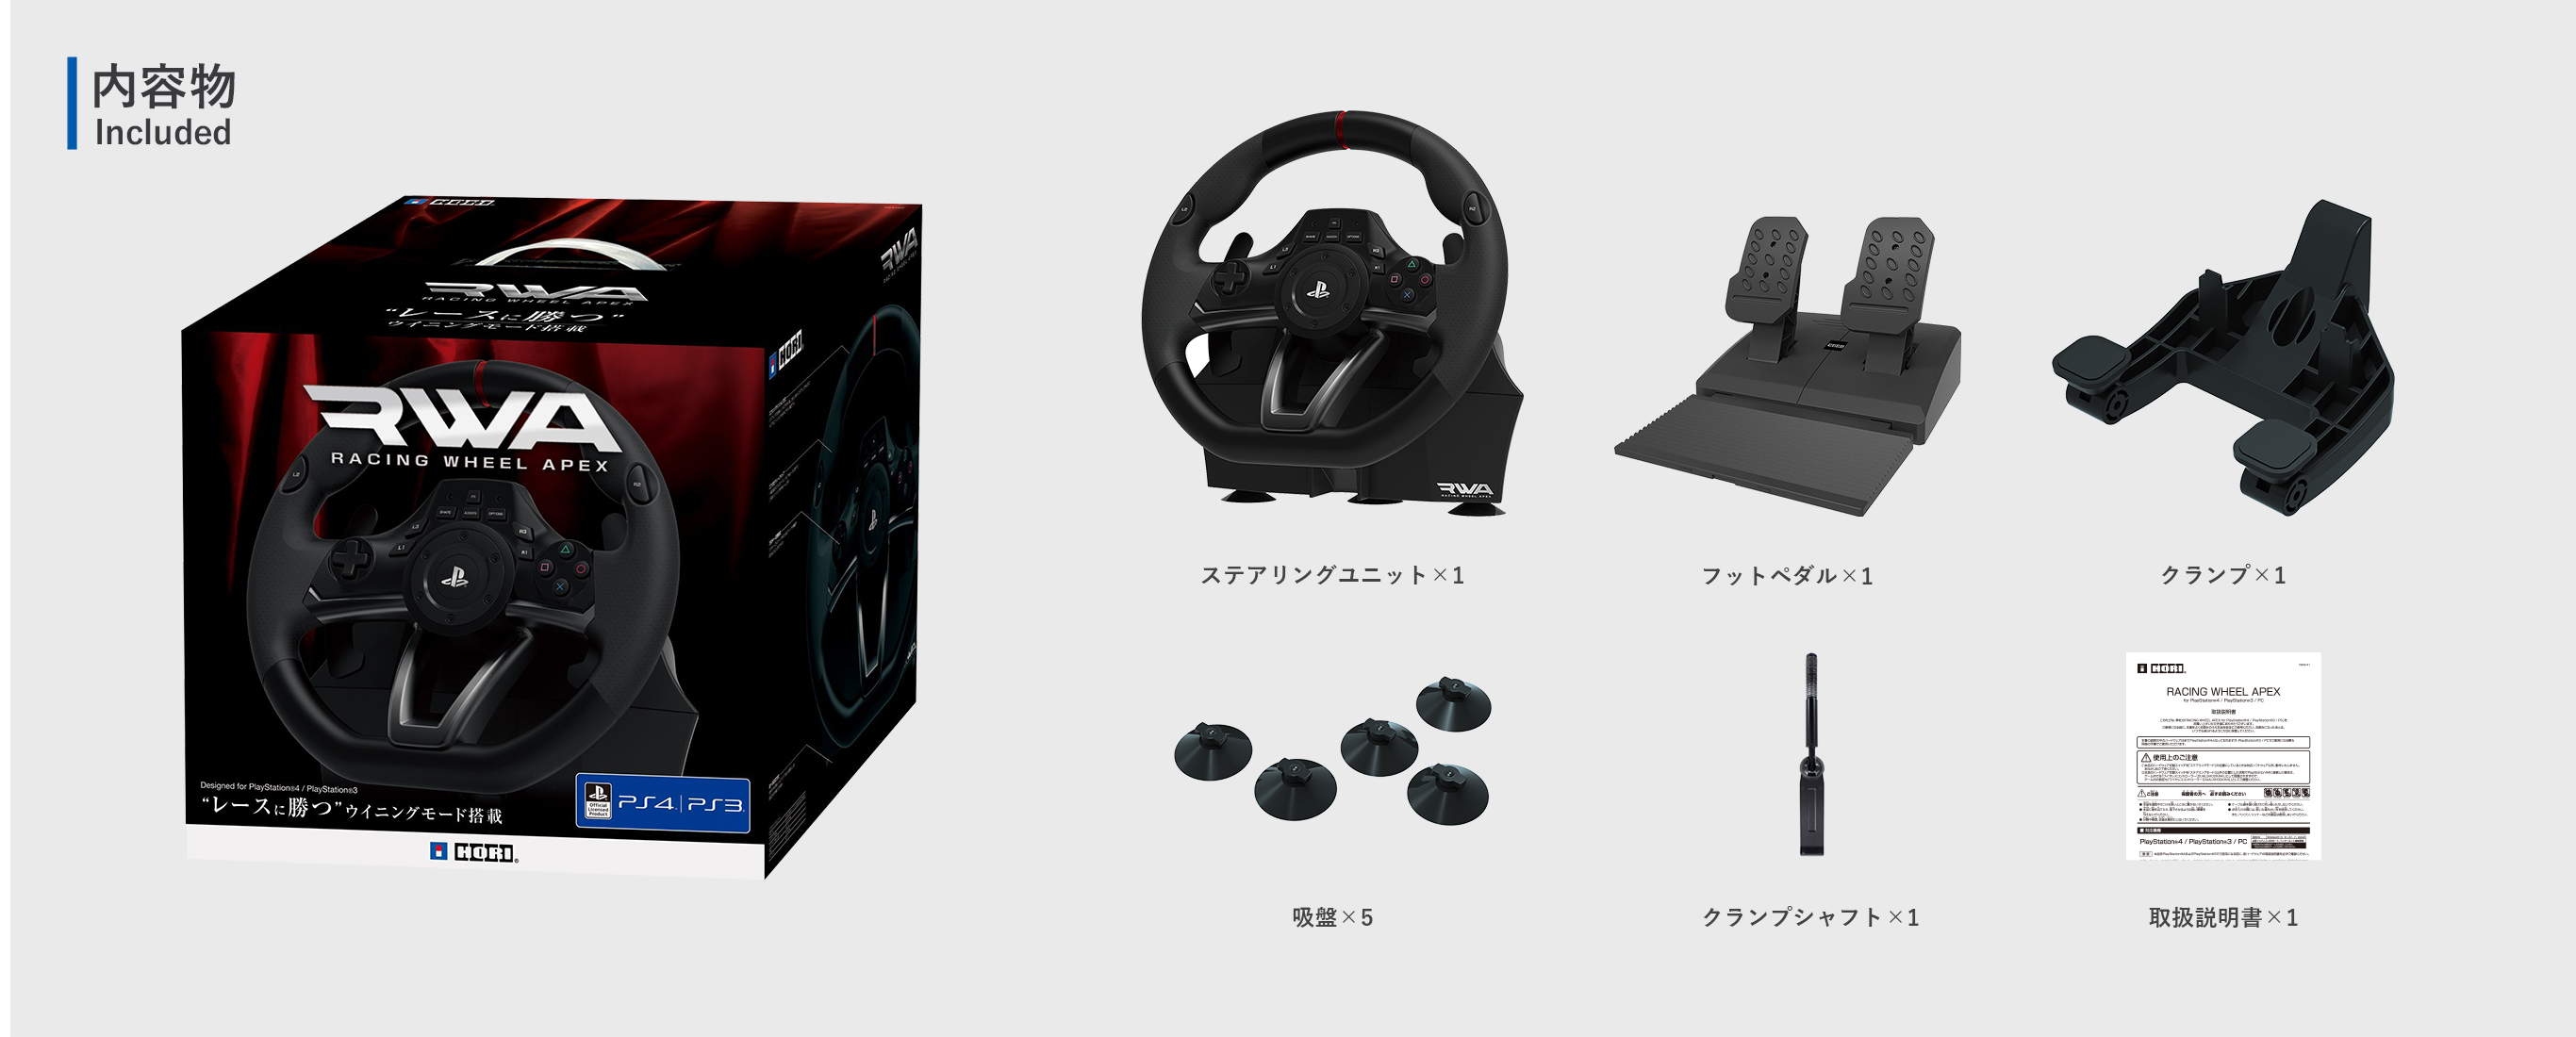 Racing Wheel Apex for PS4 PS3 PC ハンコン